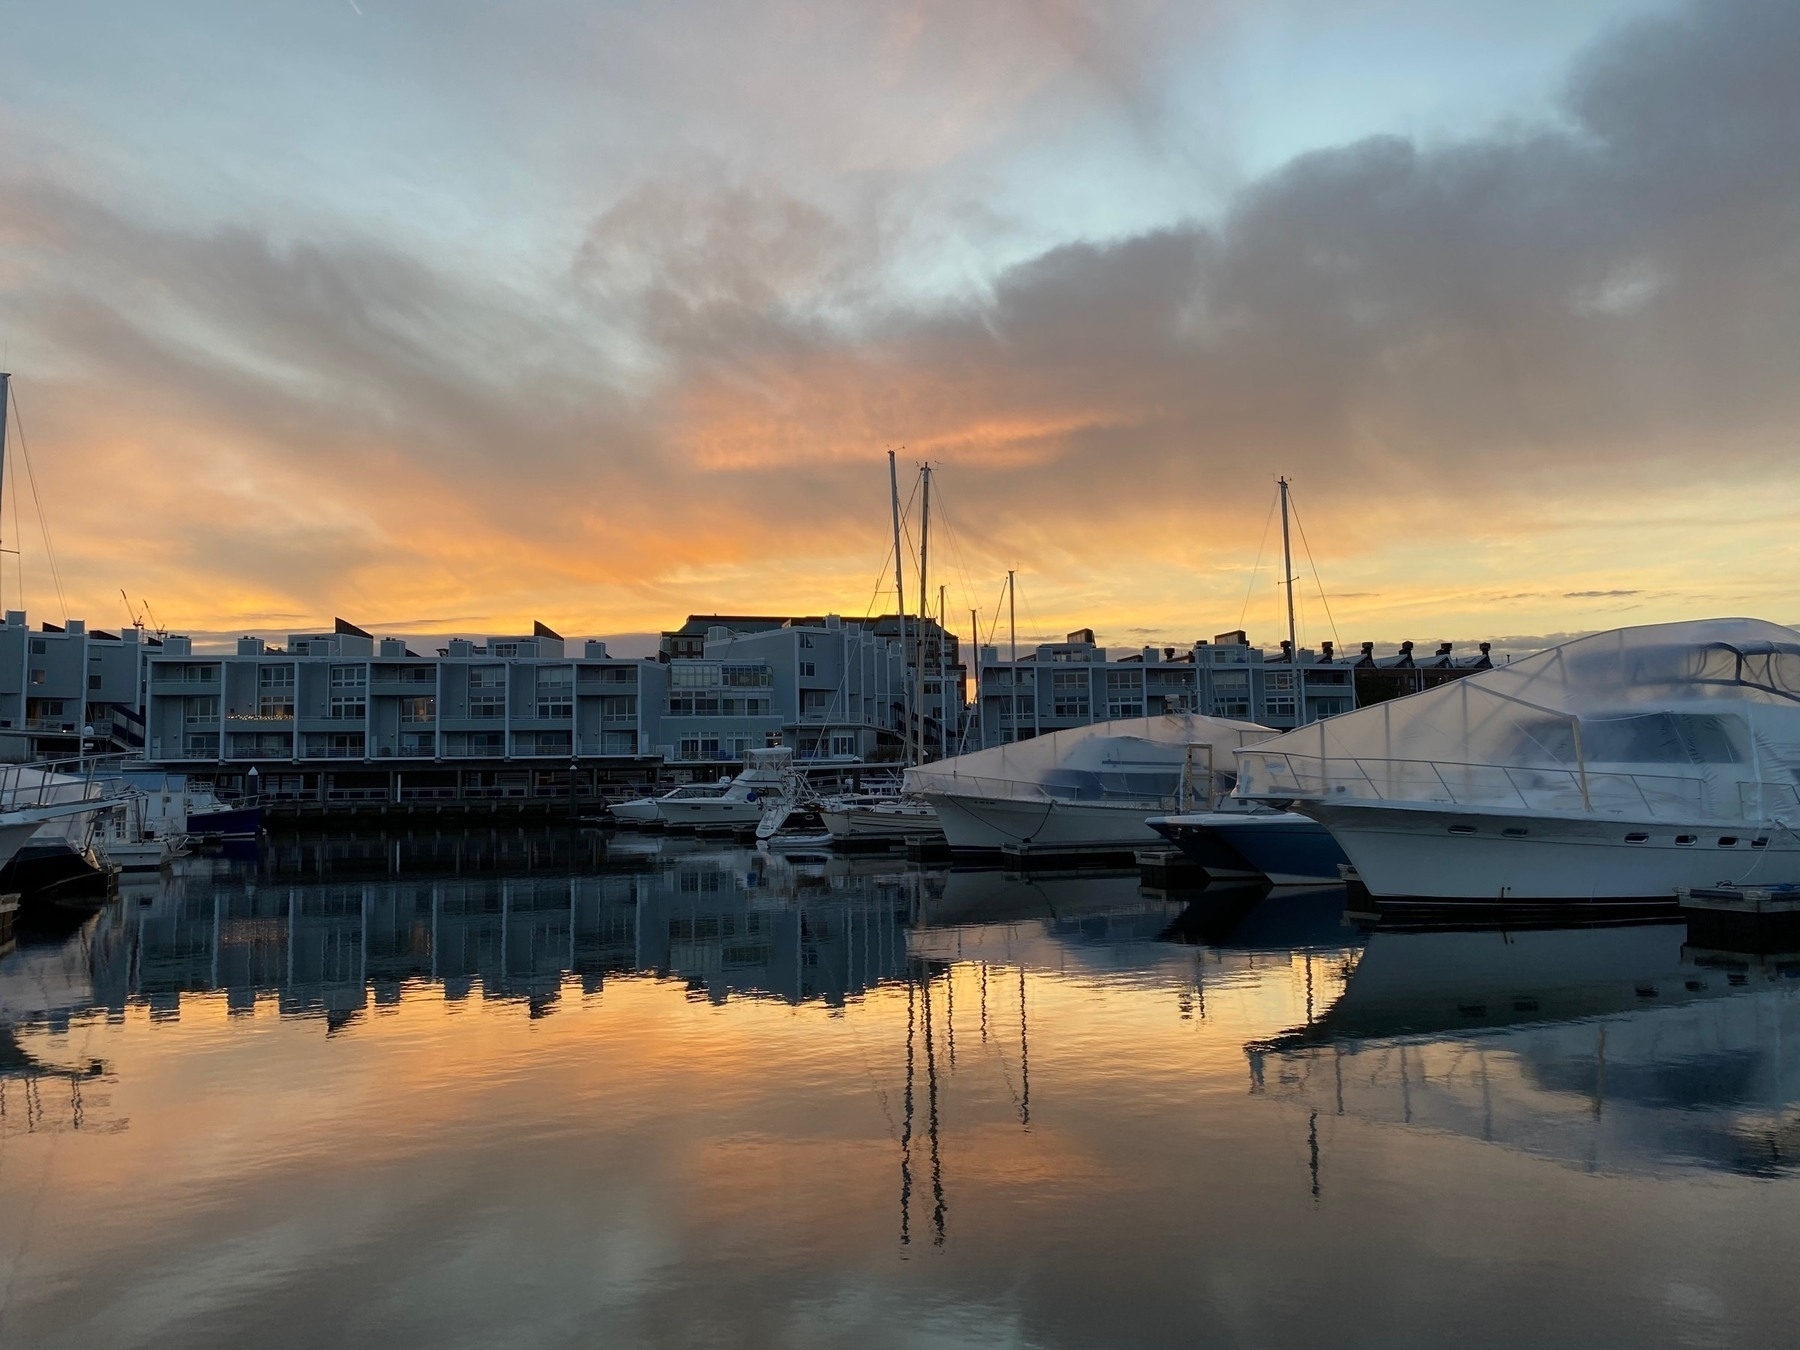 View of Charlestown Marina at sunset, the orange light shining on the clouds and reflected in the still waters below.